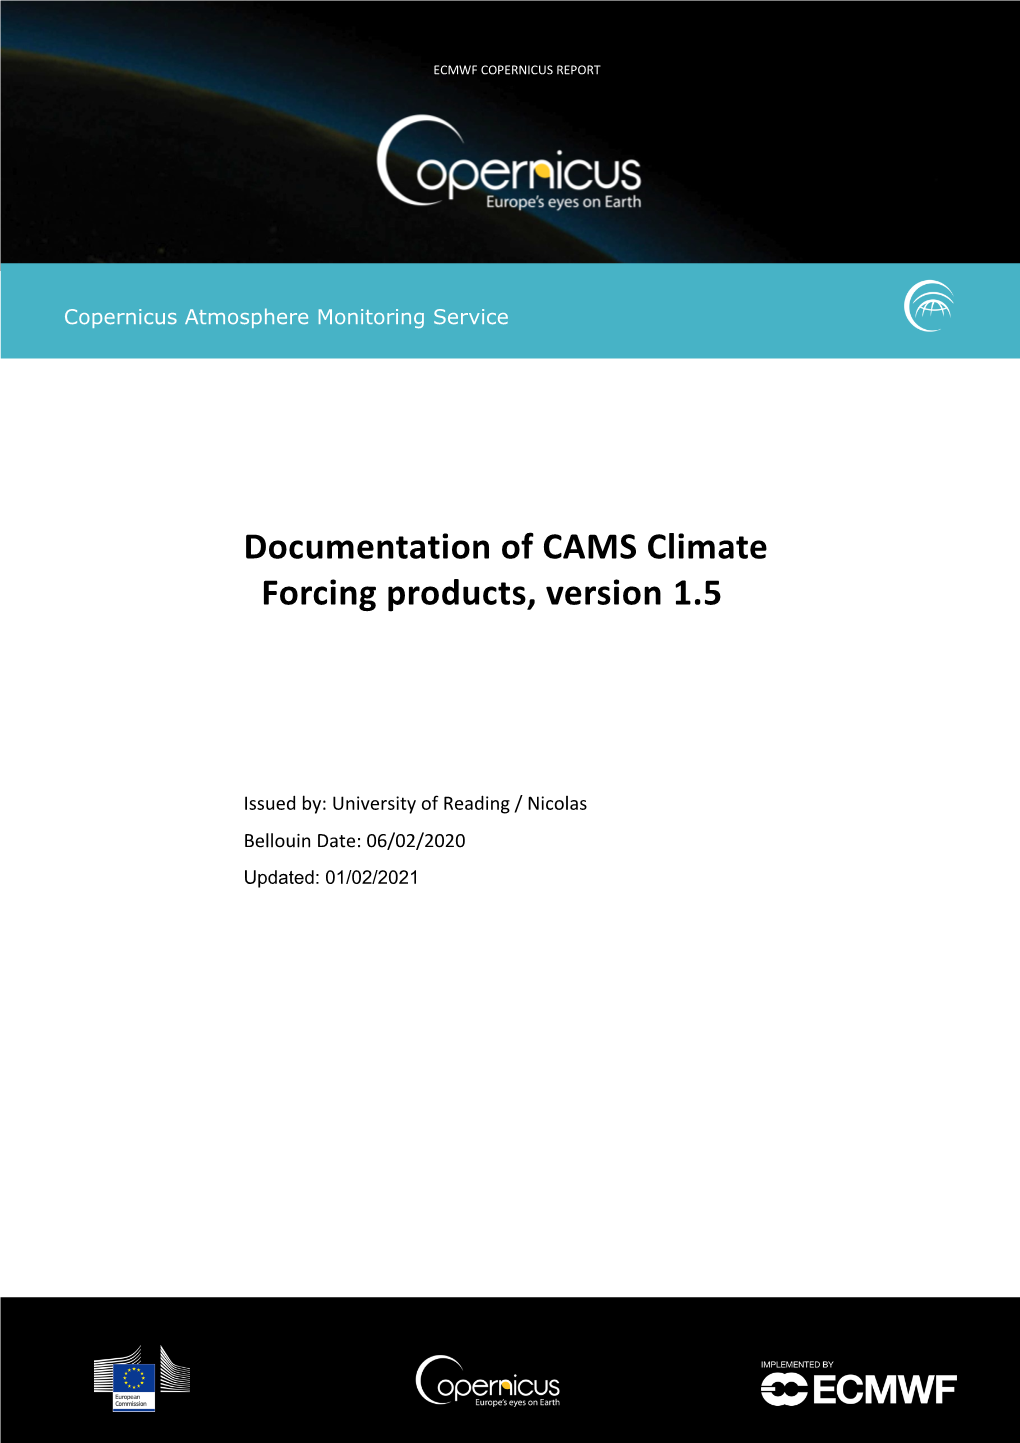 Documentation of CAMS Climate Forcing Products, Version 1.5